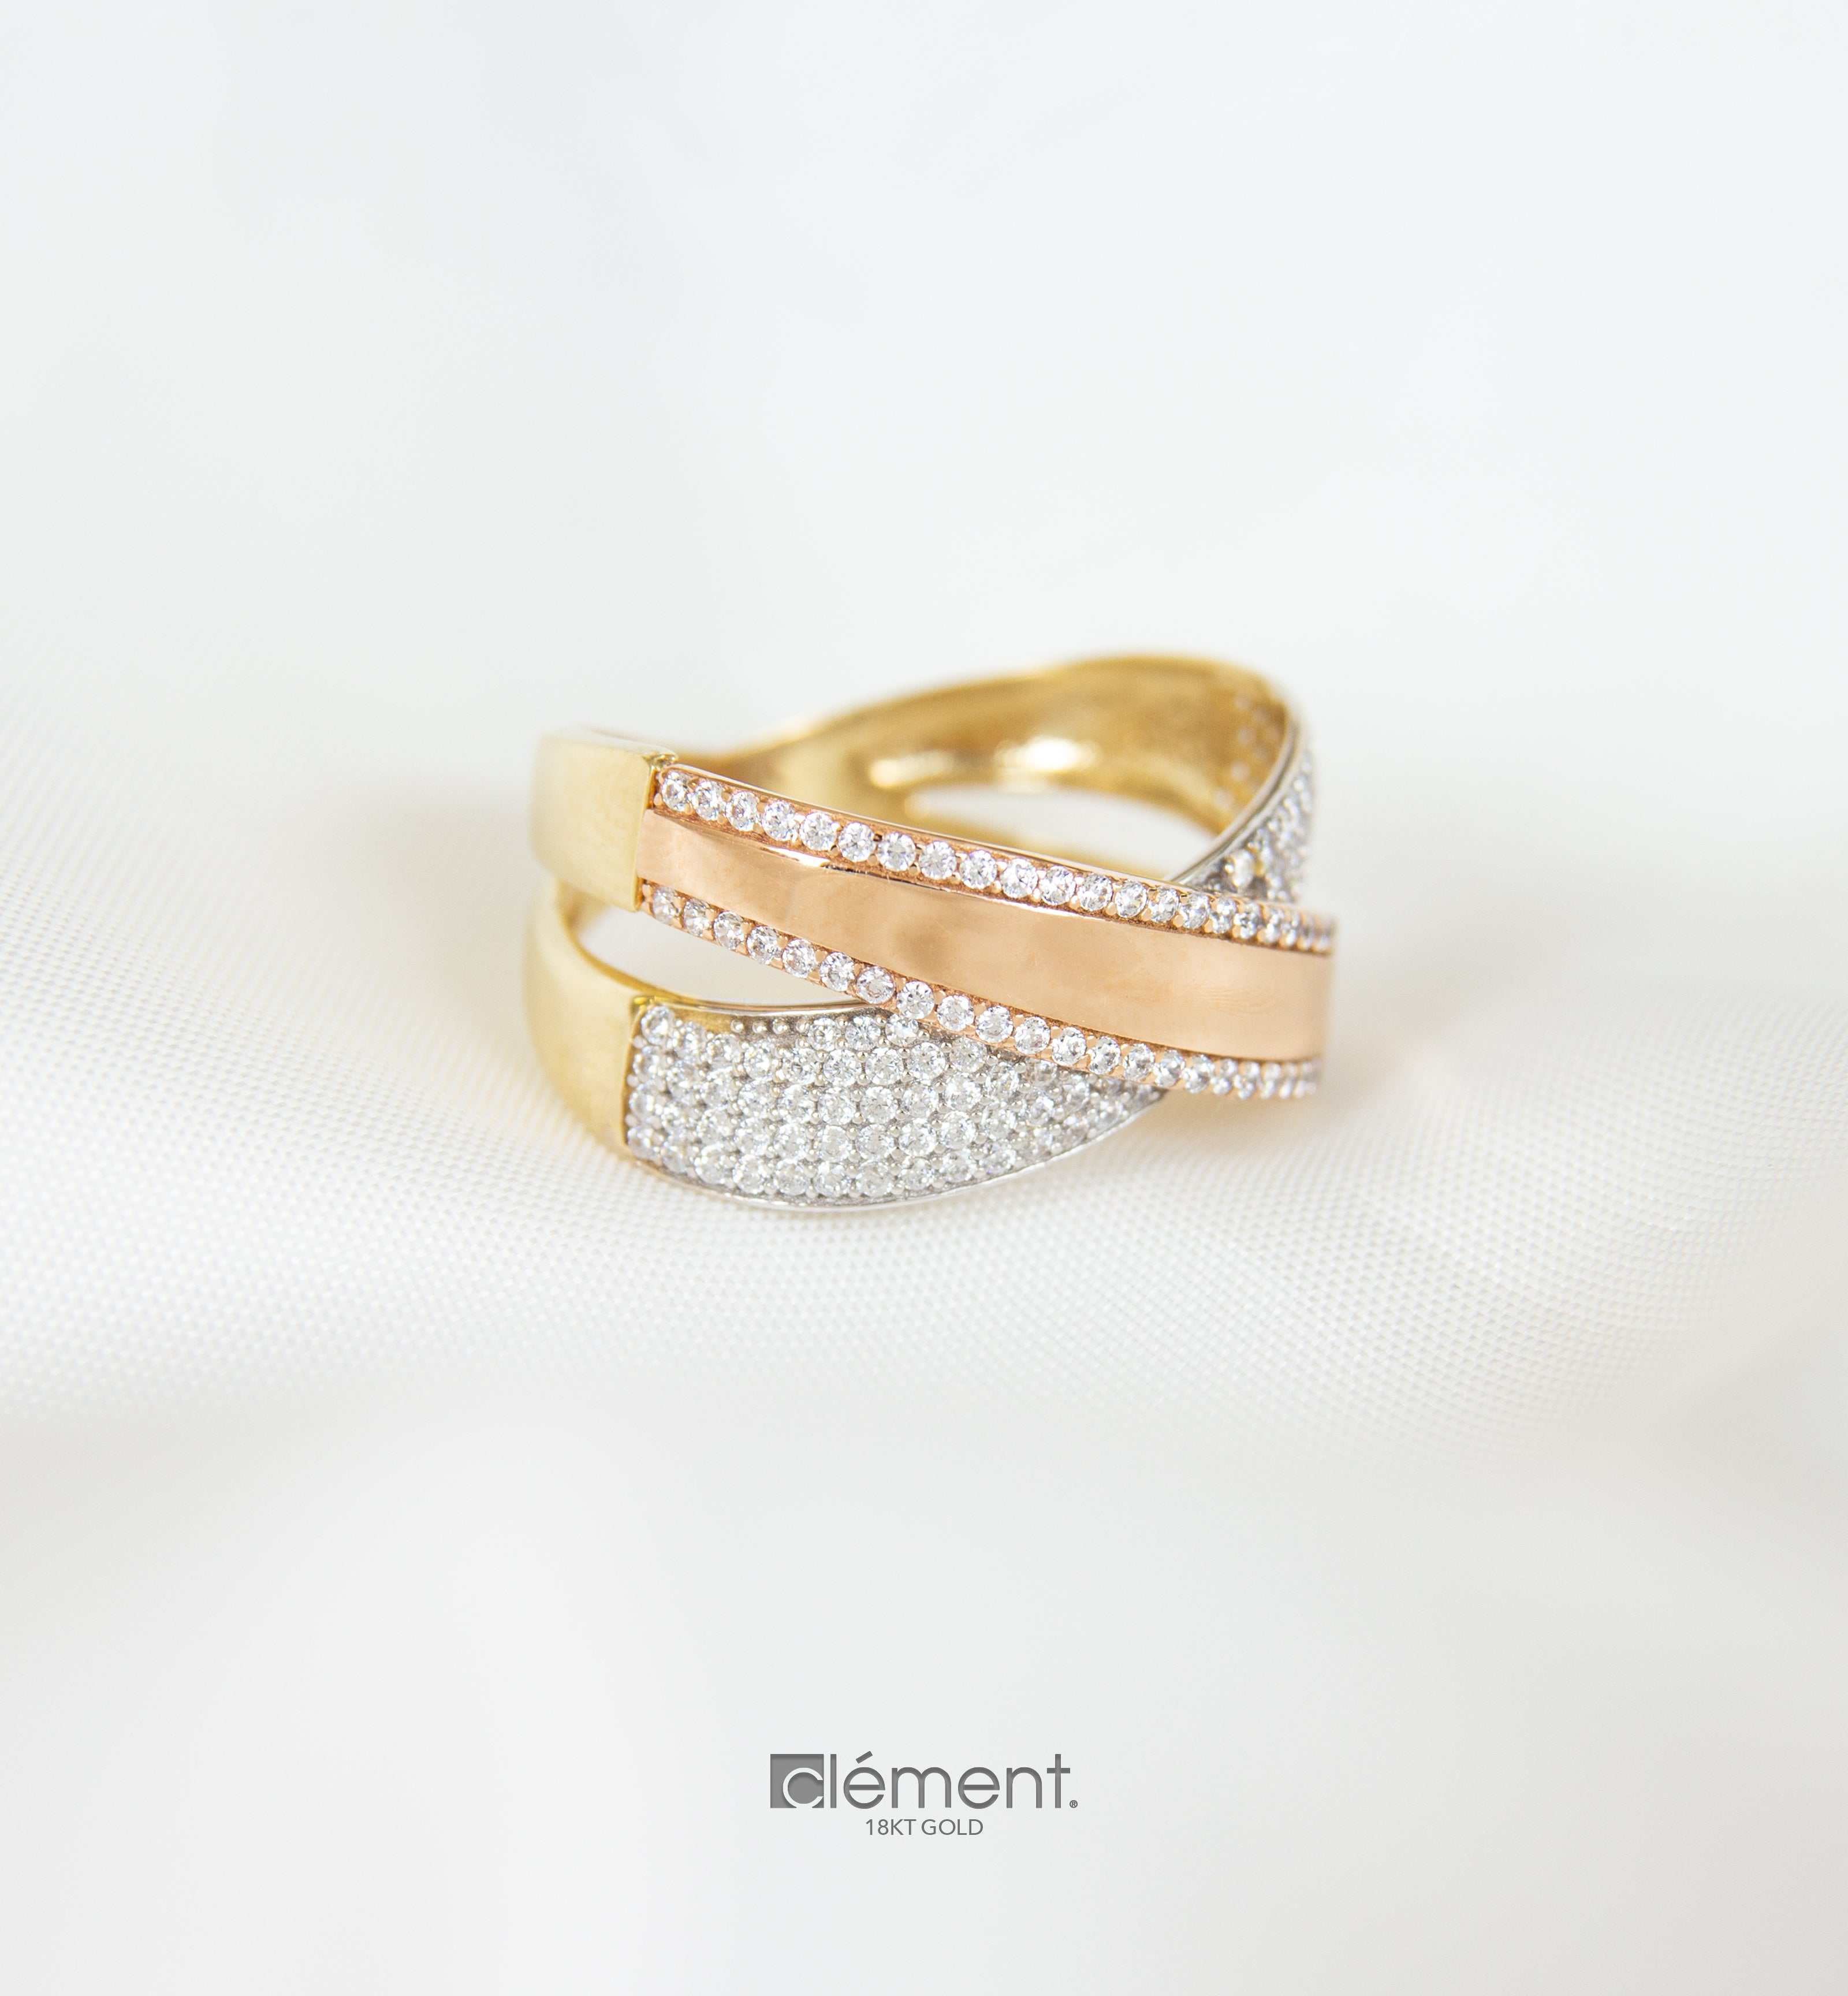 18ct Gold Two-Tone Ring